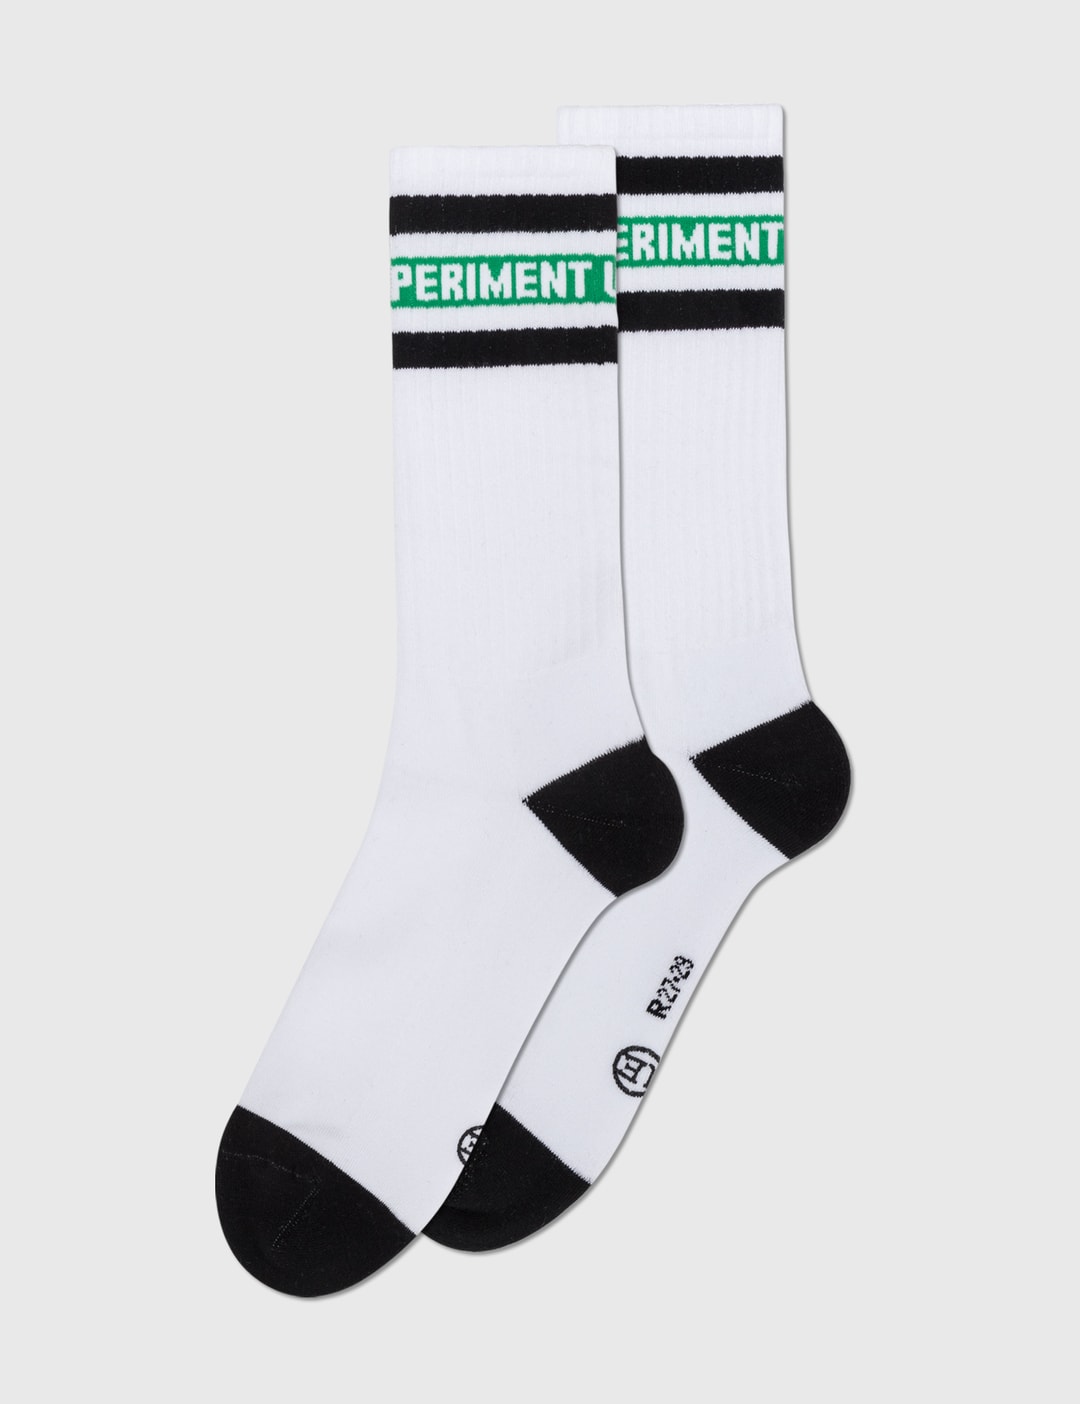 experiment - Line Regular Socks | HBX - Globally Curated Fashion and Lifestyle by Hypebeast